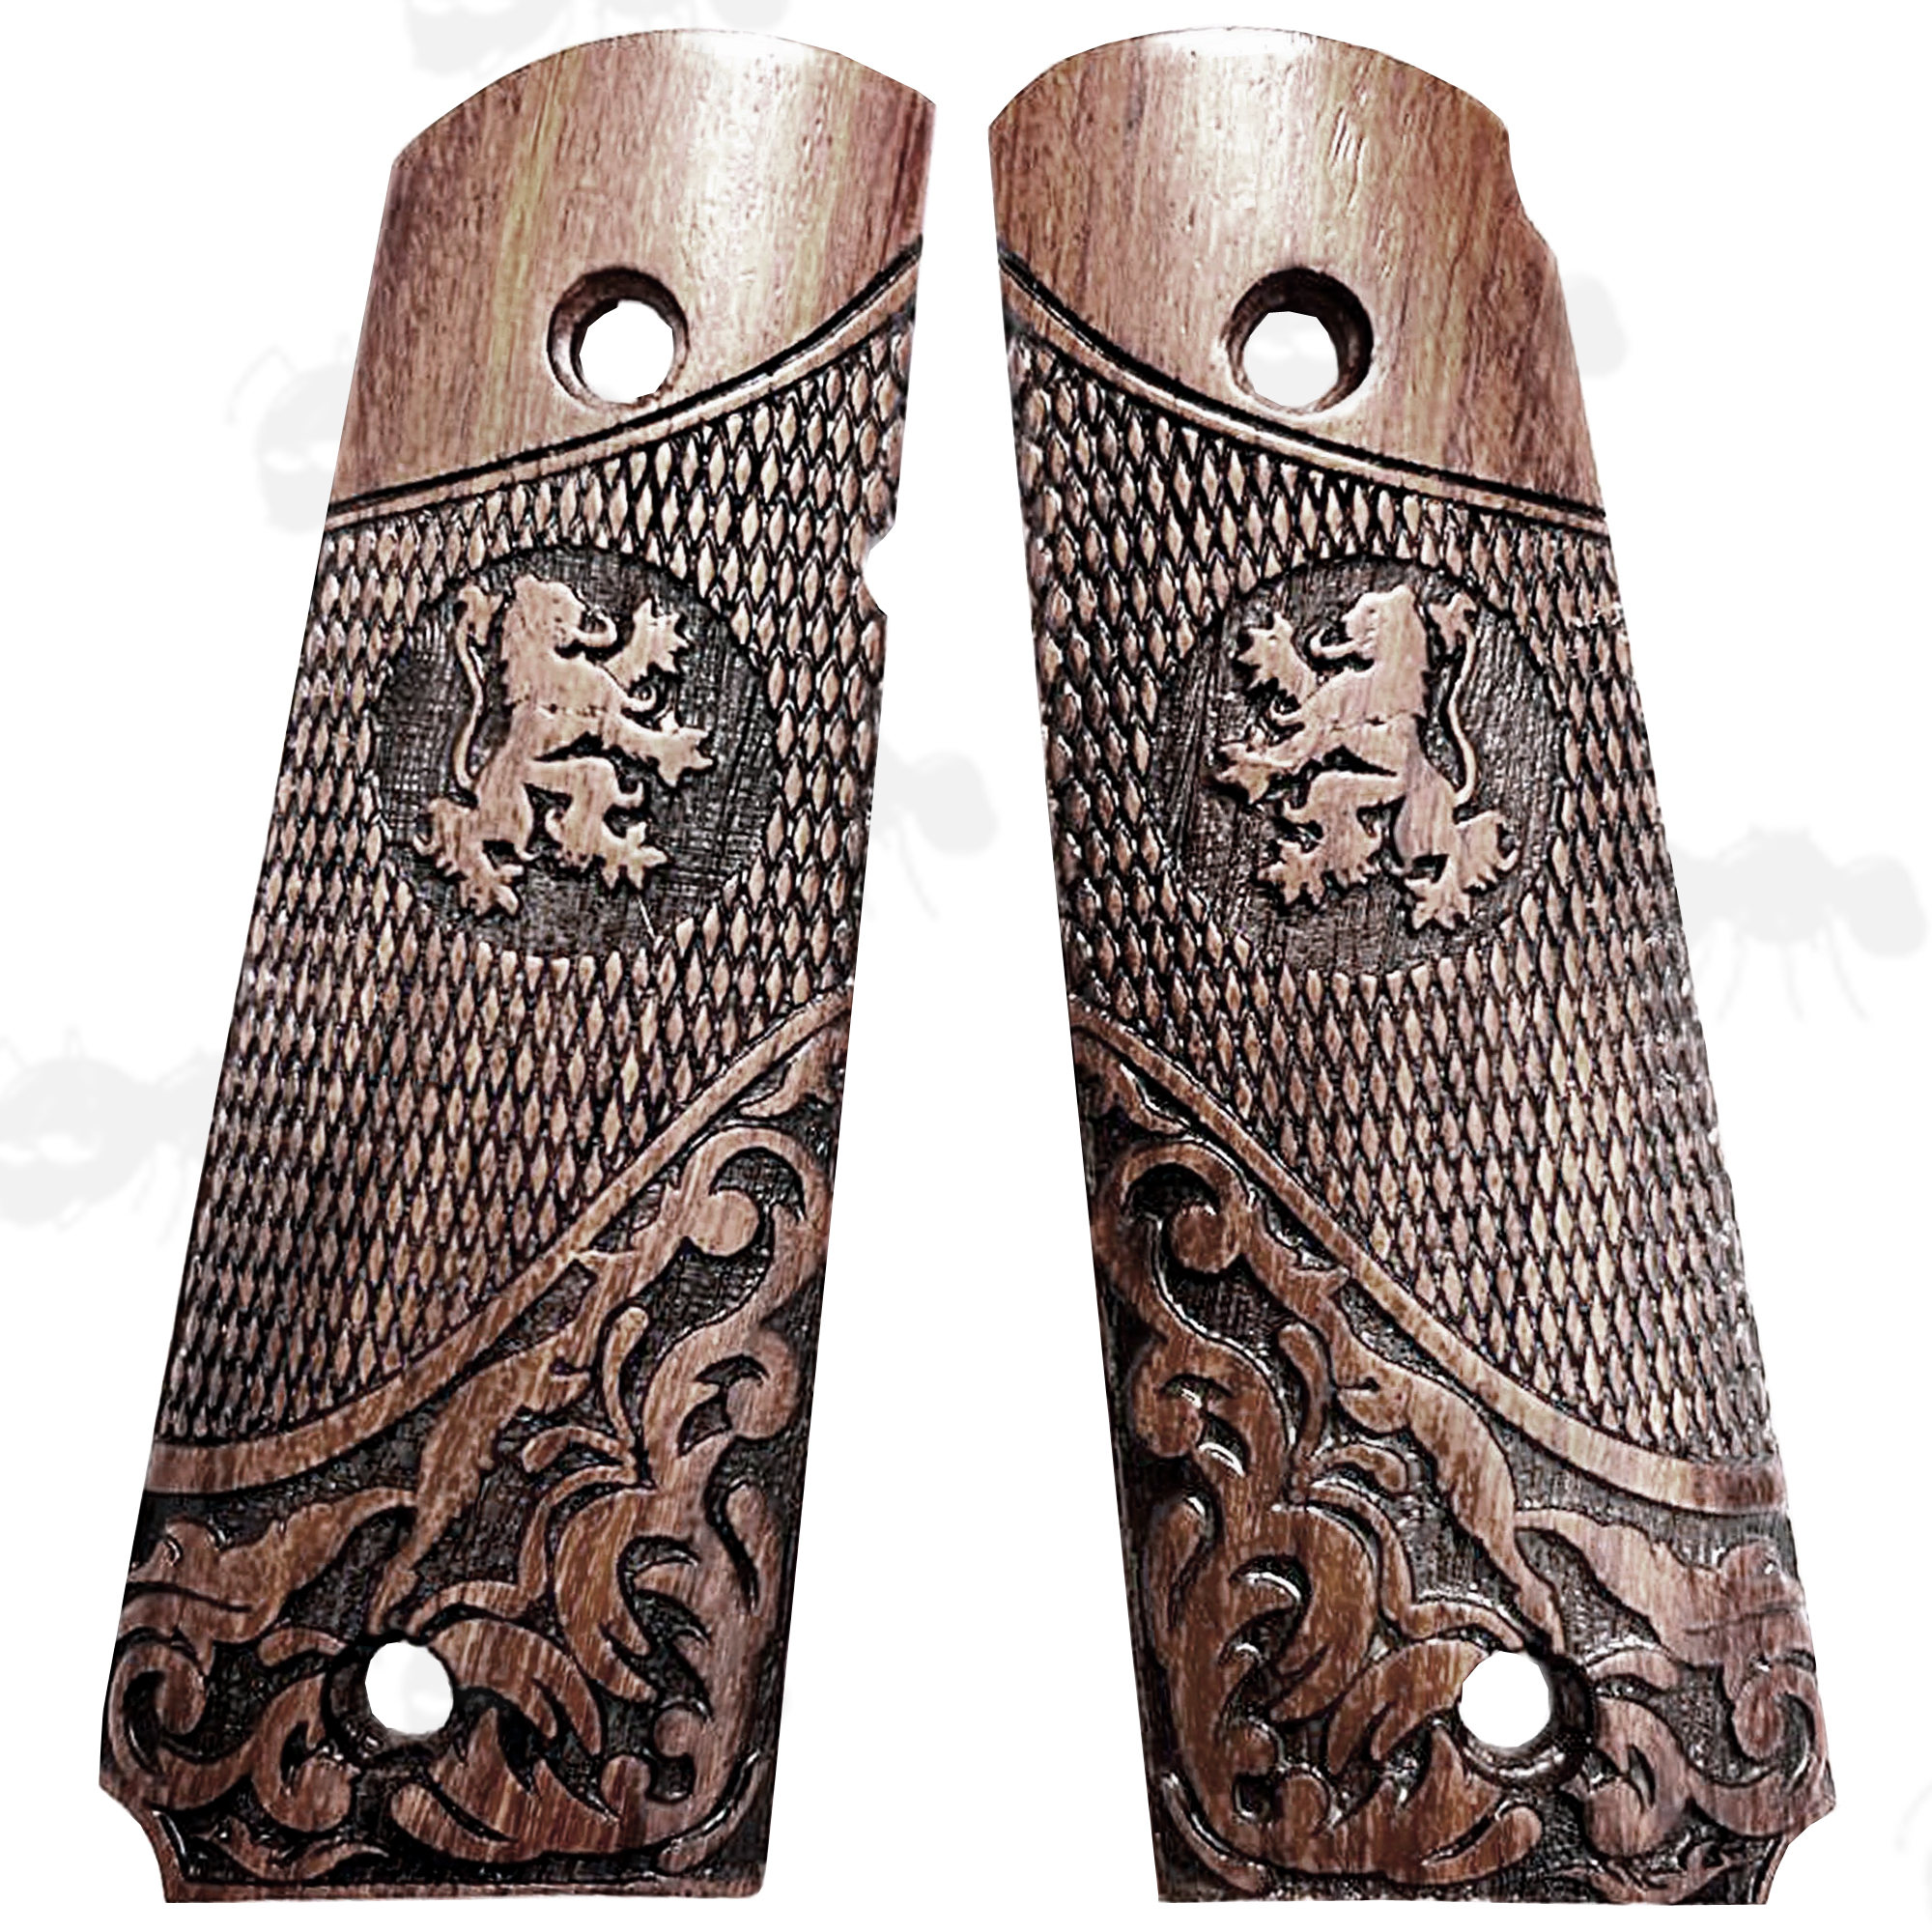 Pair of Full Size Teak Wood 1911 Pistol Grips with a Textured Finish